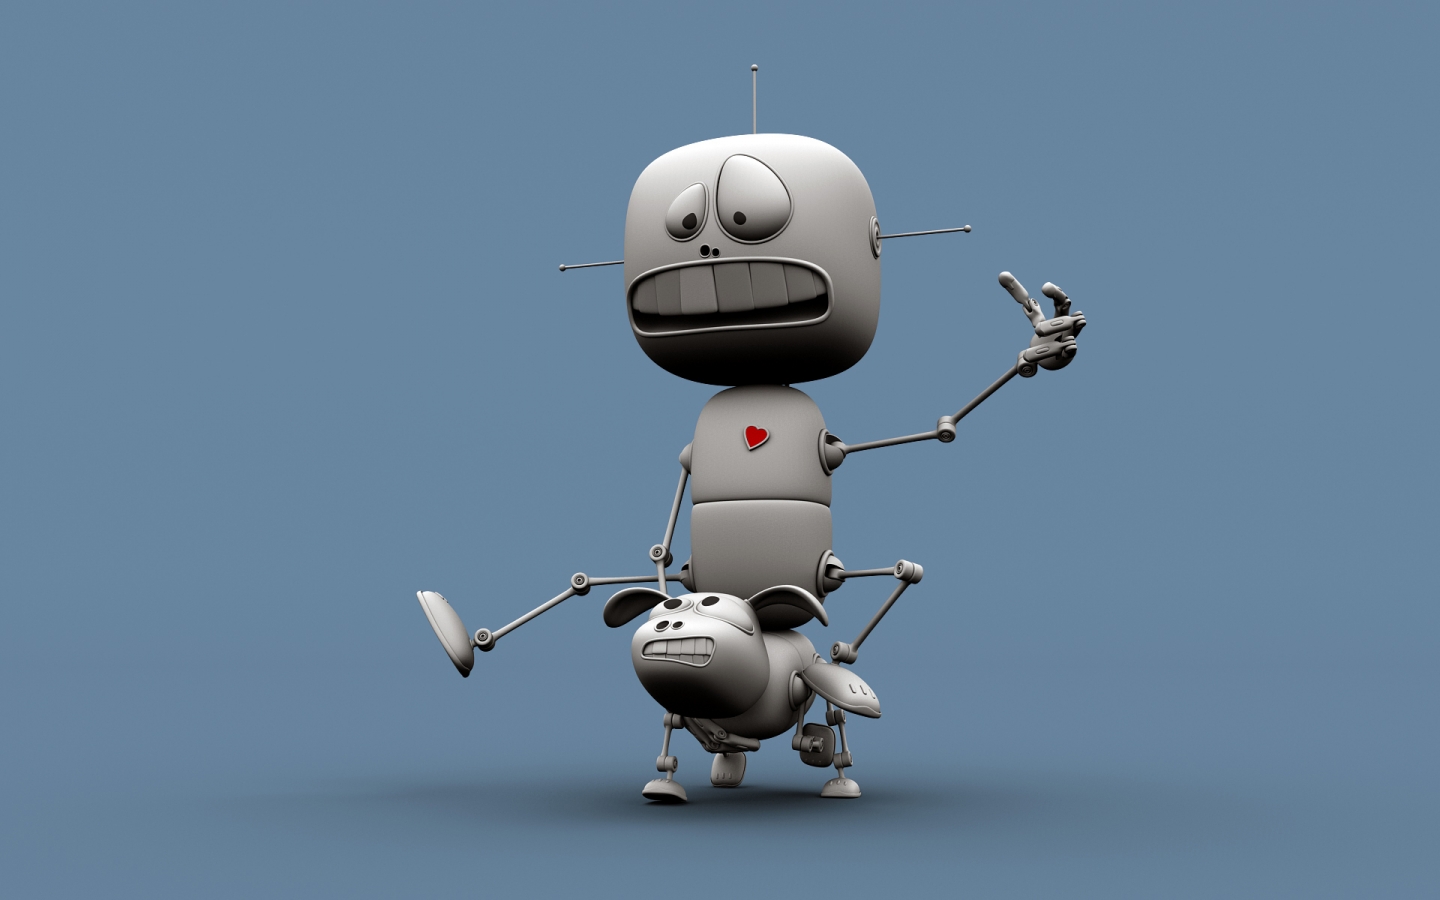 Some Funny Robots for 1440 x 900 widescreen resolution